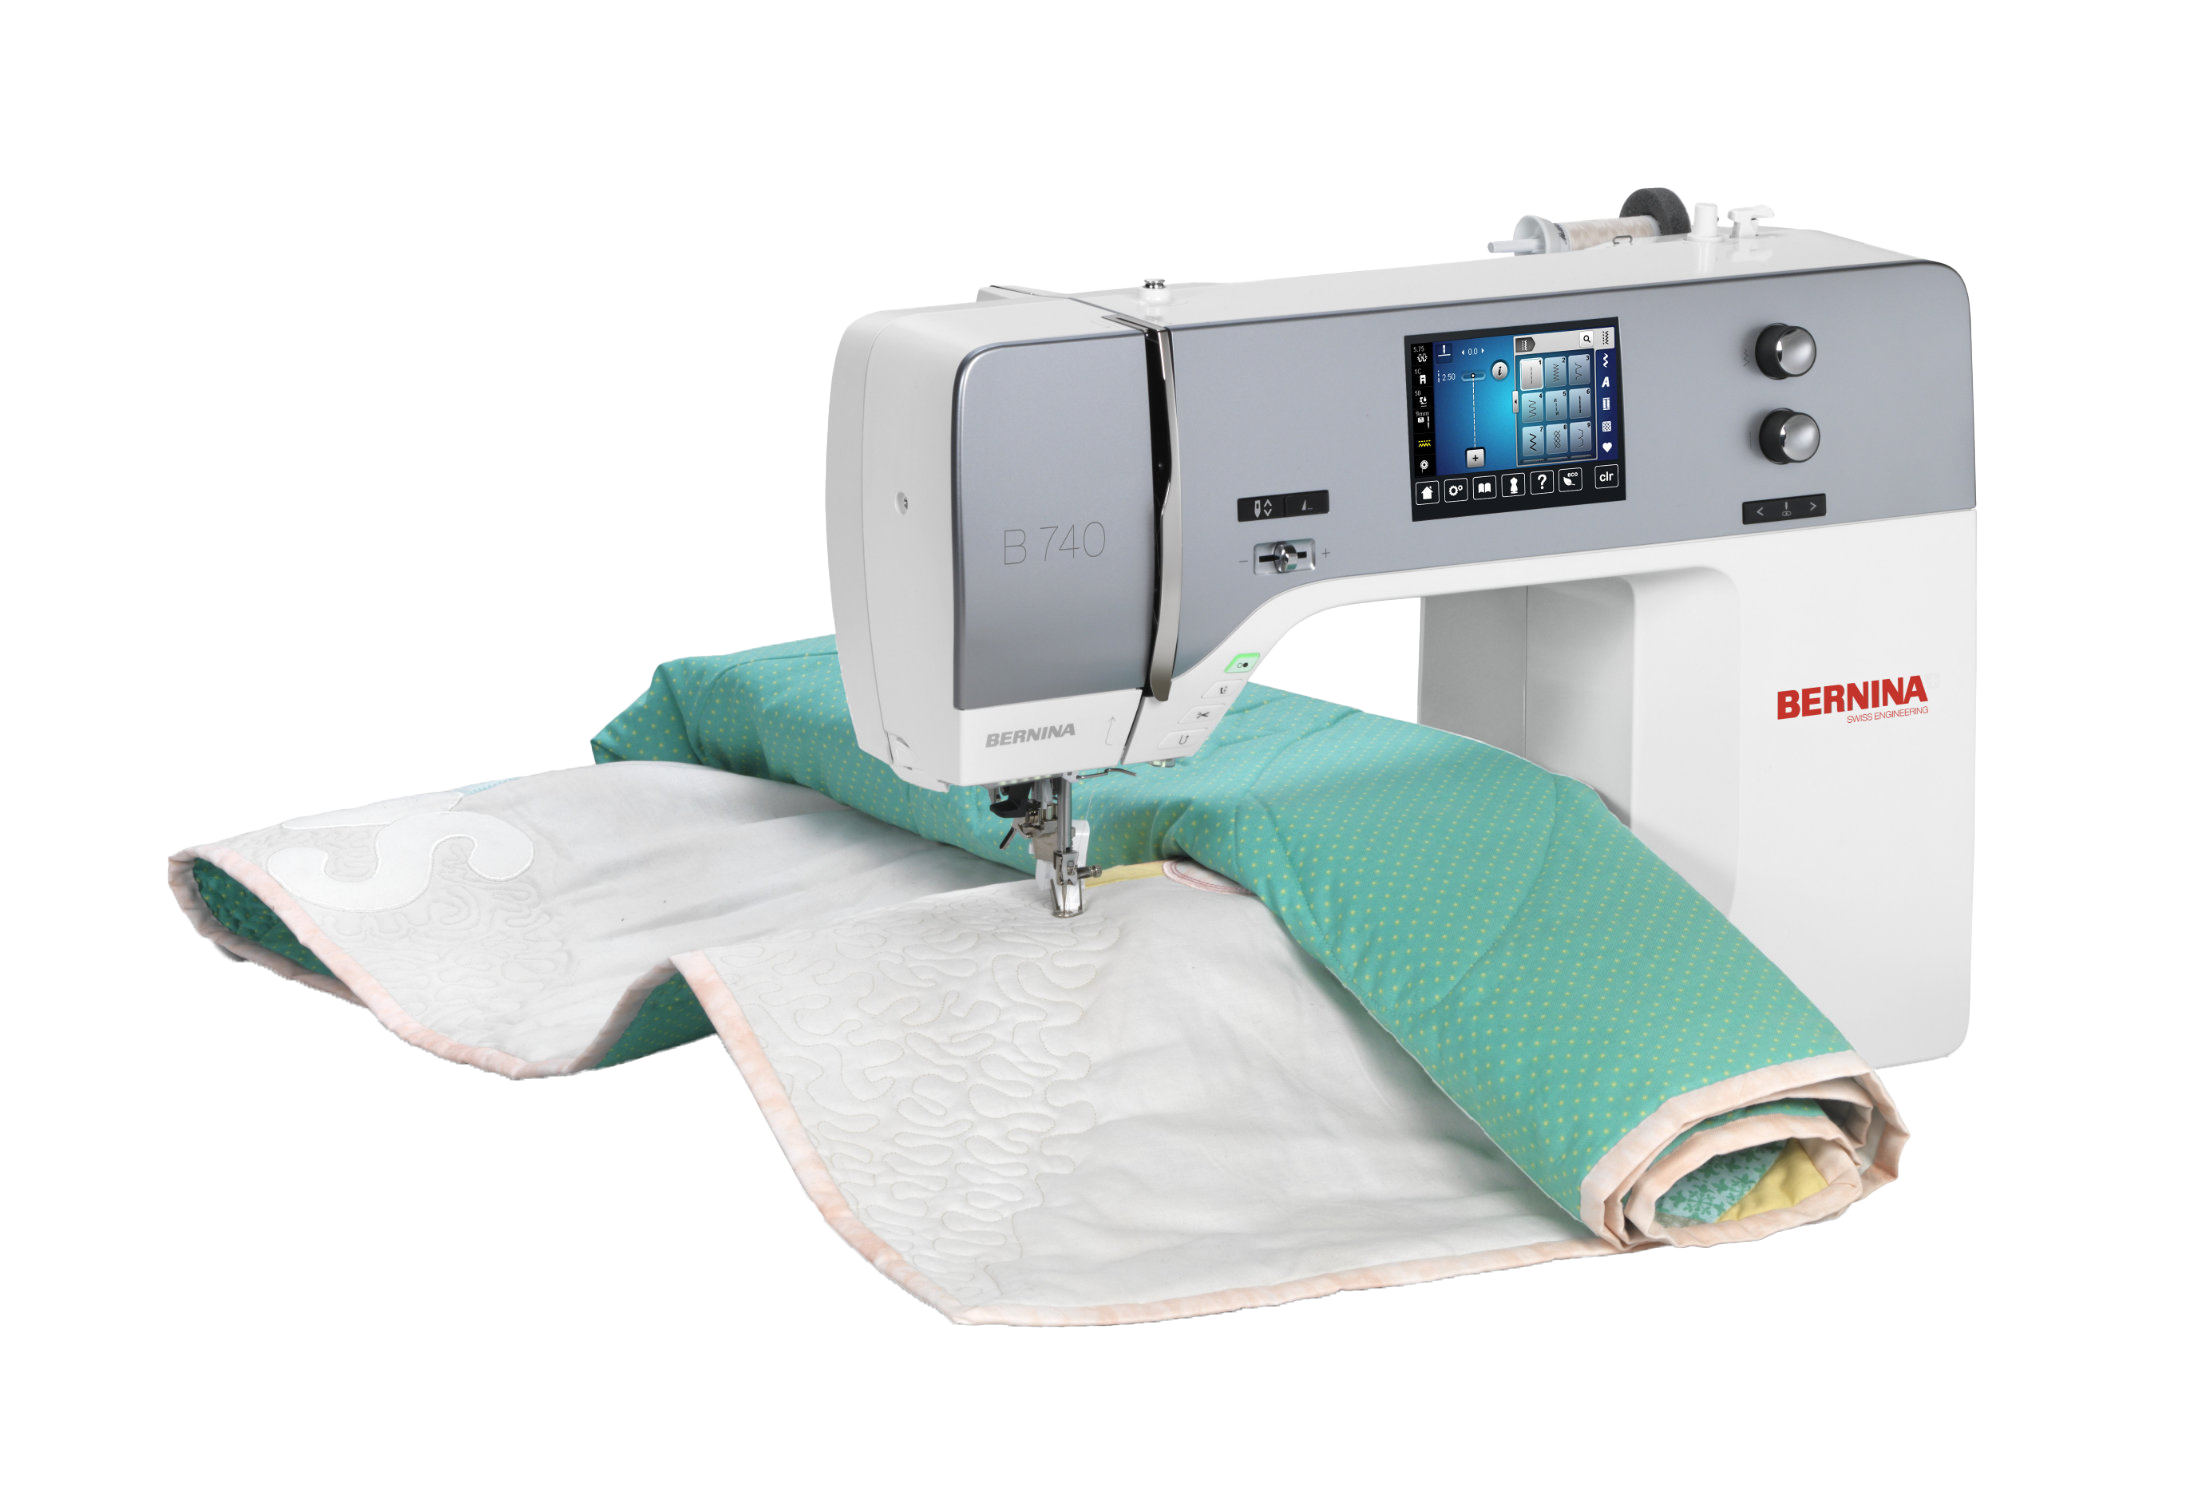 image of the online exclusive BERNINA 740 Sewing Machine with a quilt